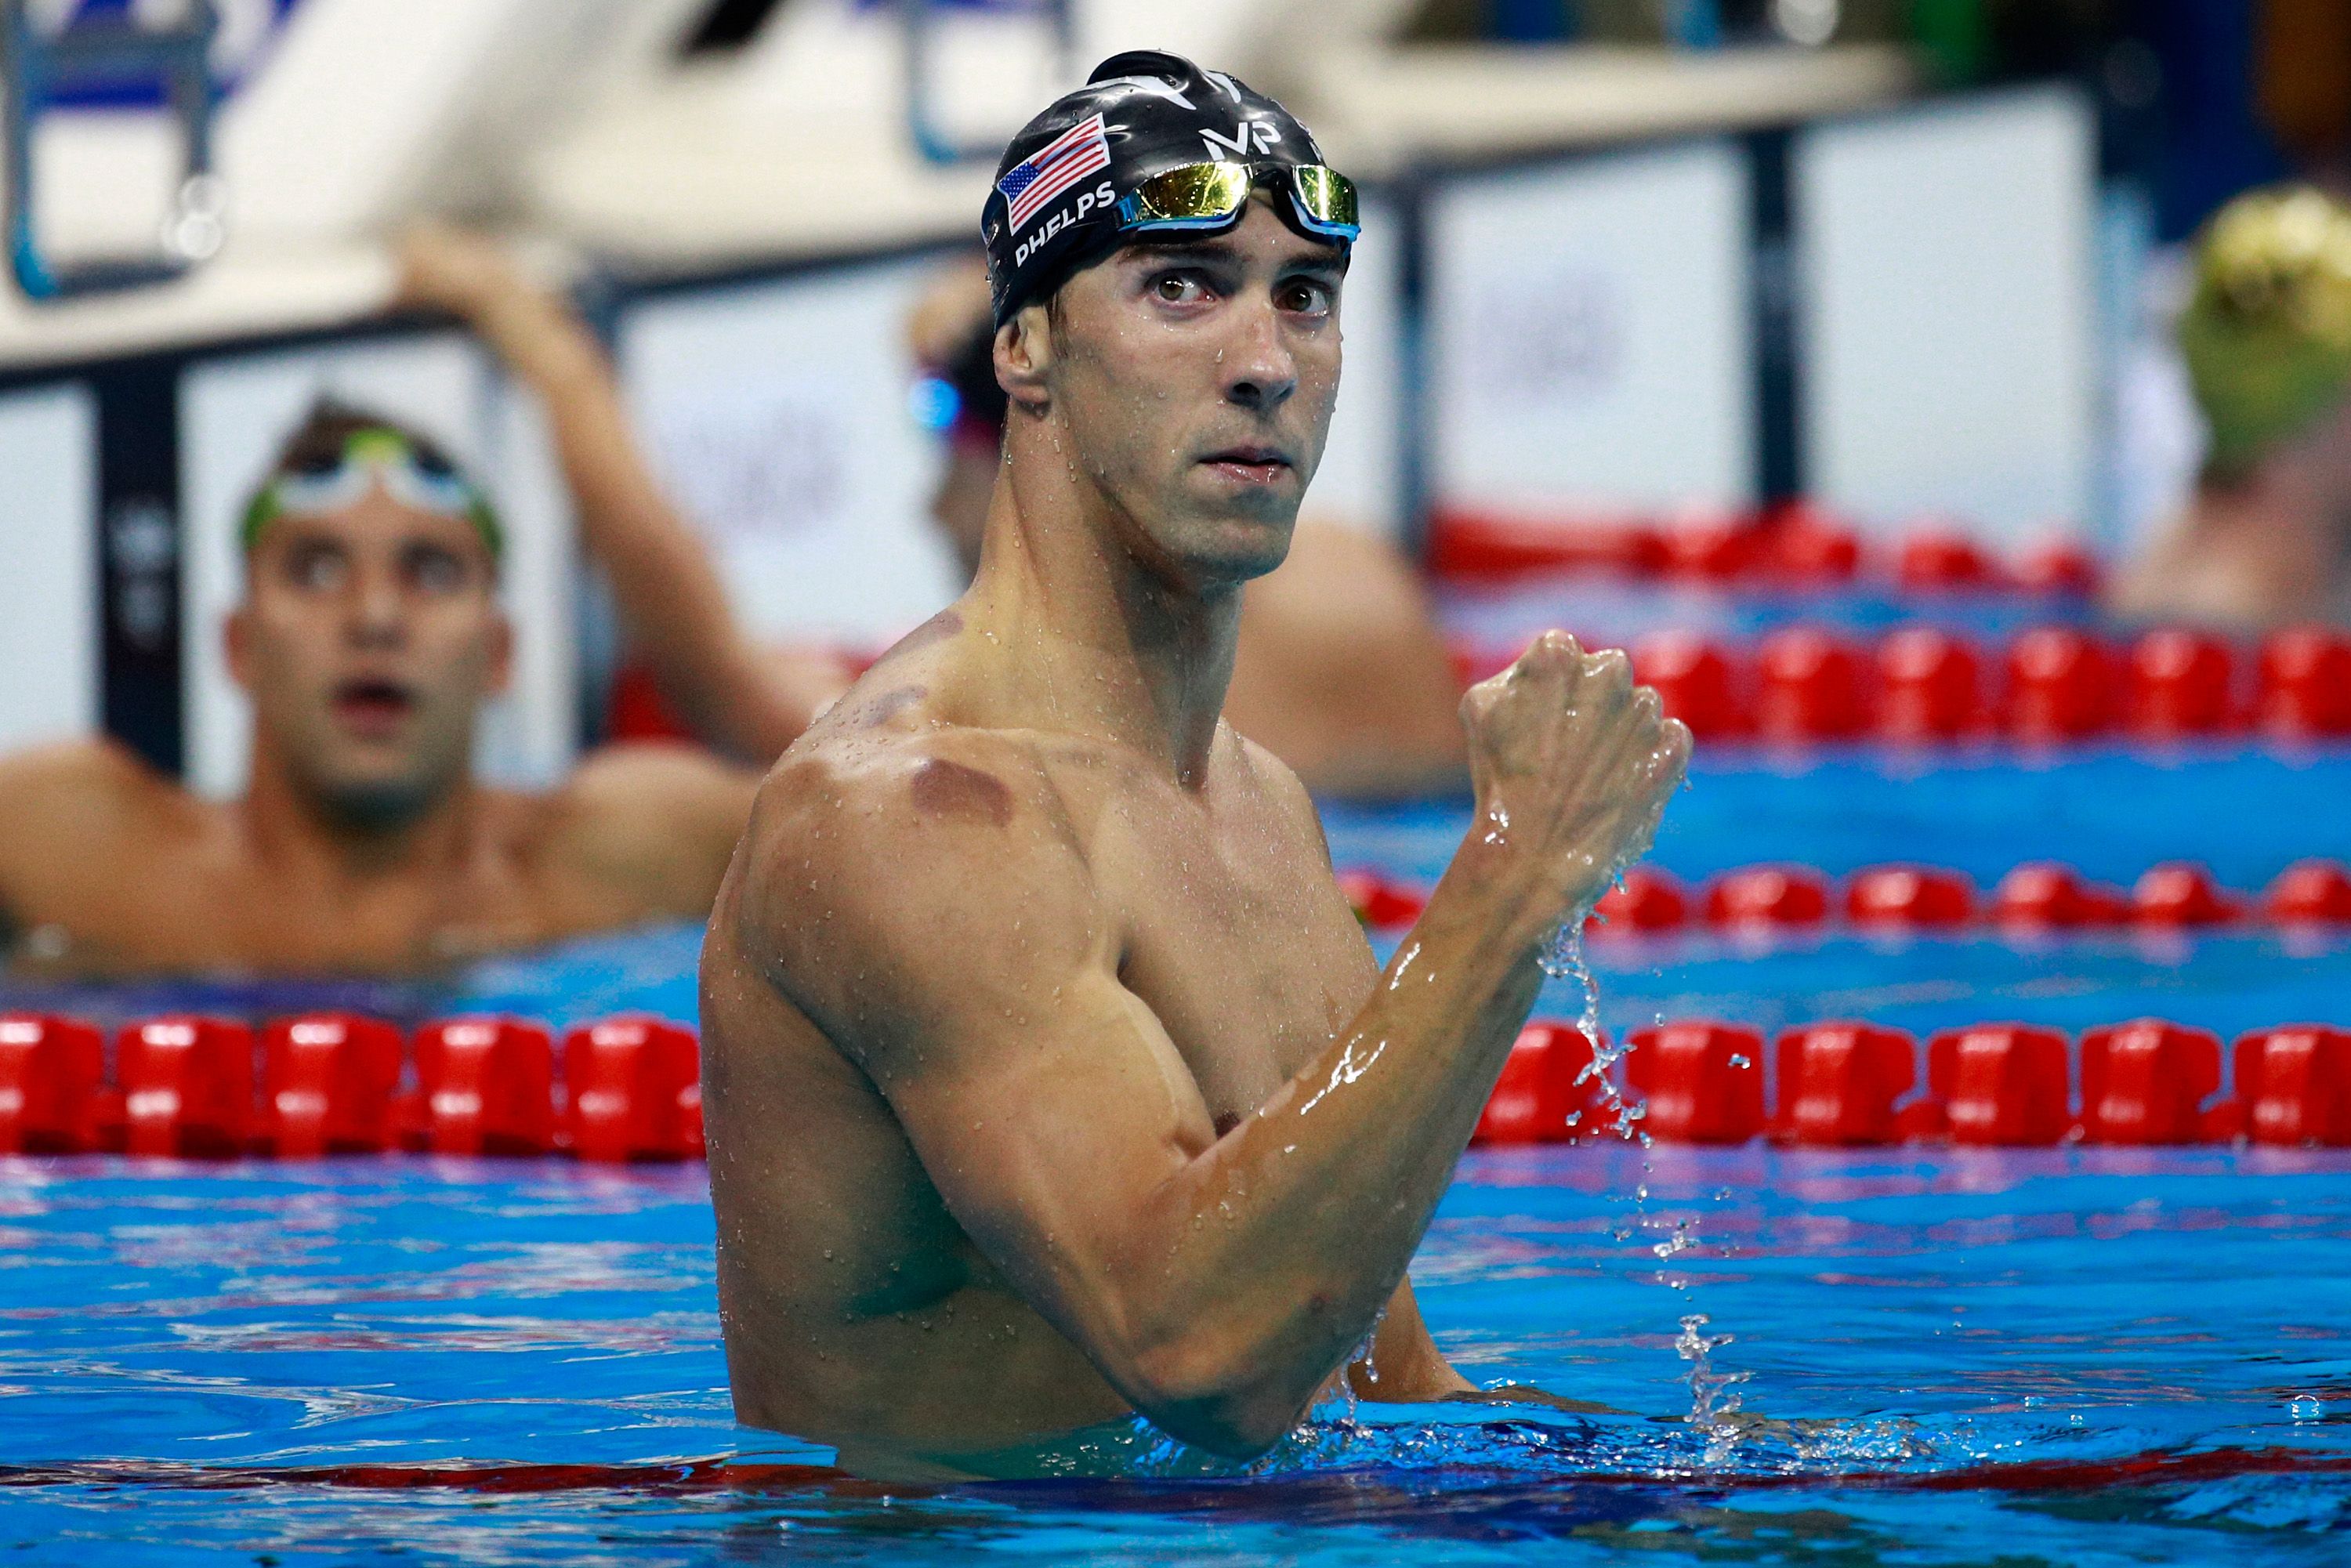 Why Michael Phelps Has the Perfect Body for Swimming